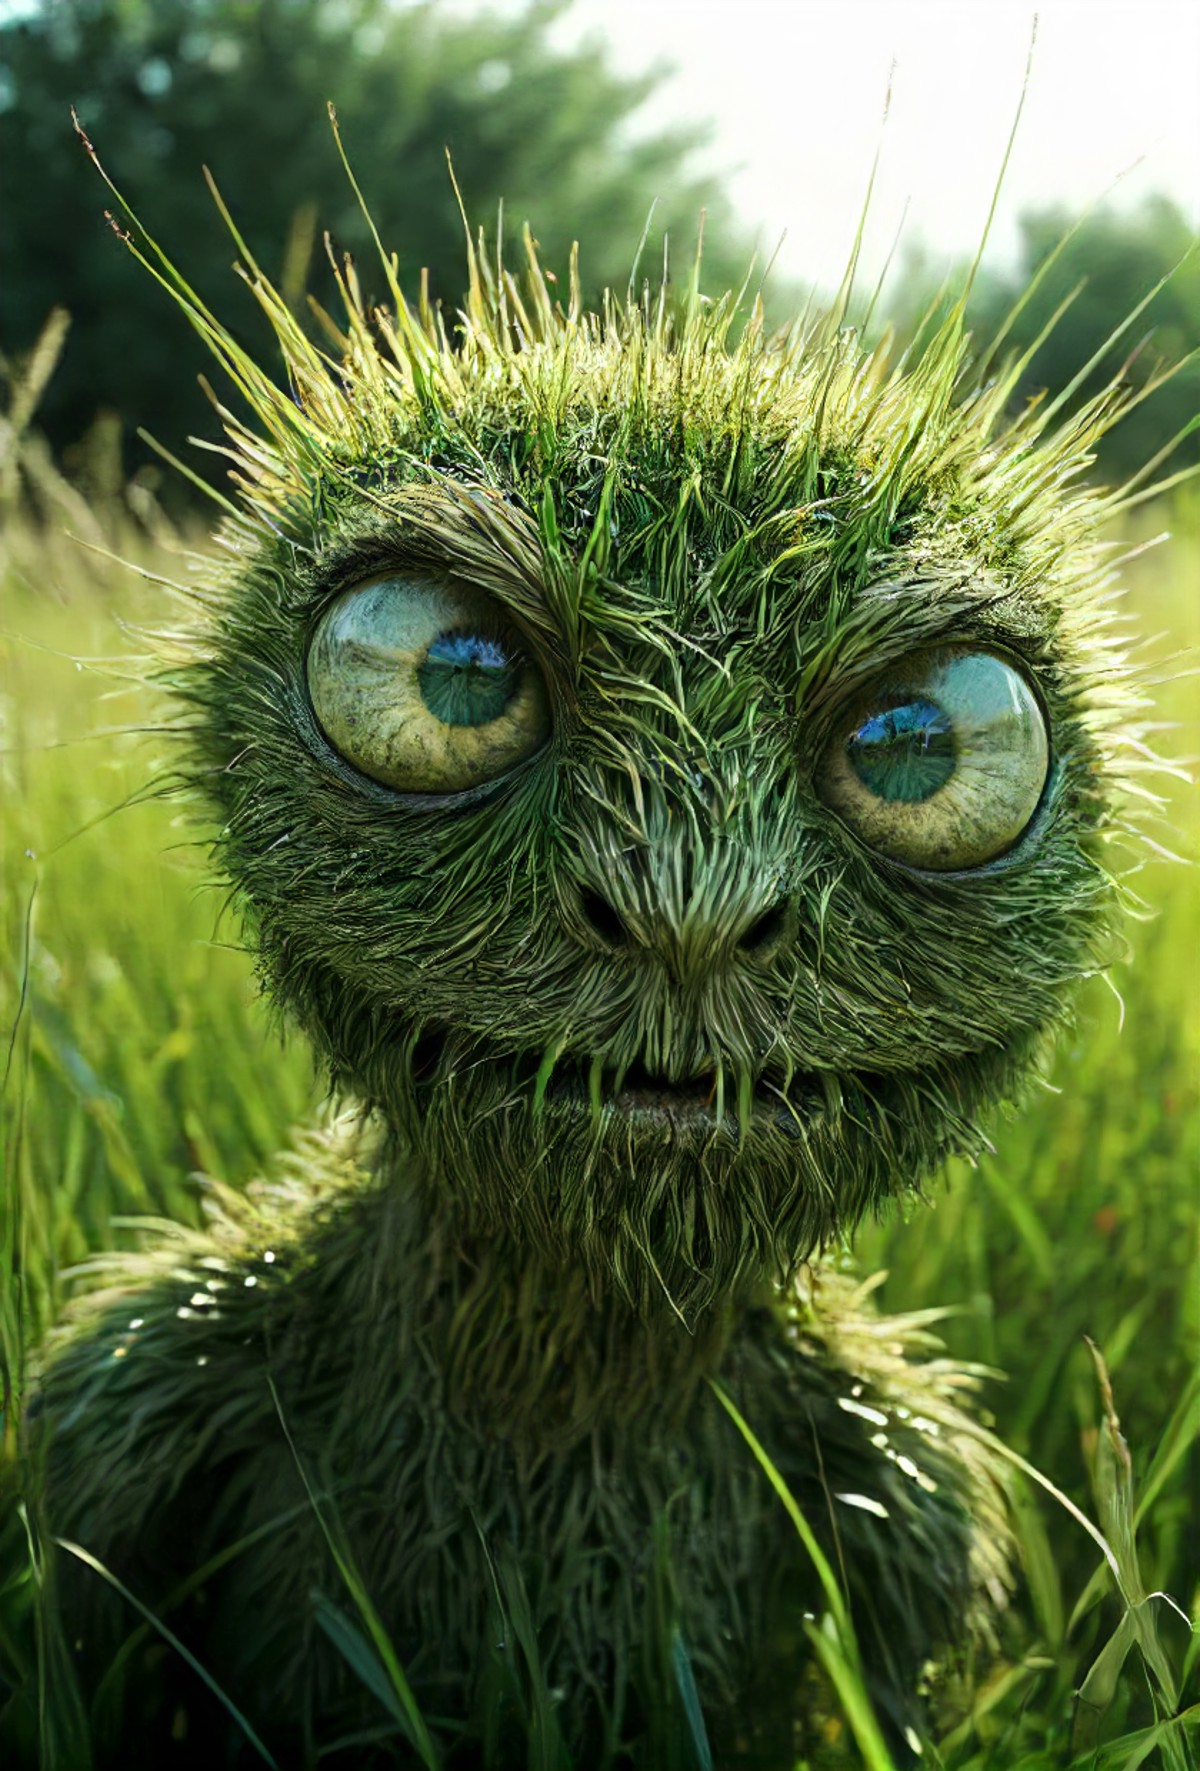 depiction of a strange looking grass creature threatening you to touch it, expressive face, confused, intense eyes, high q...